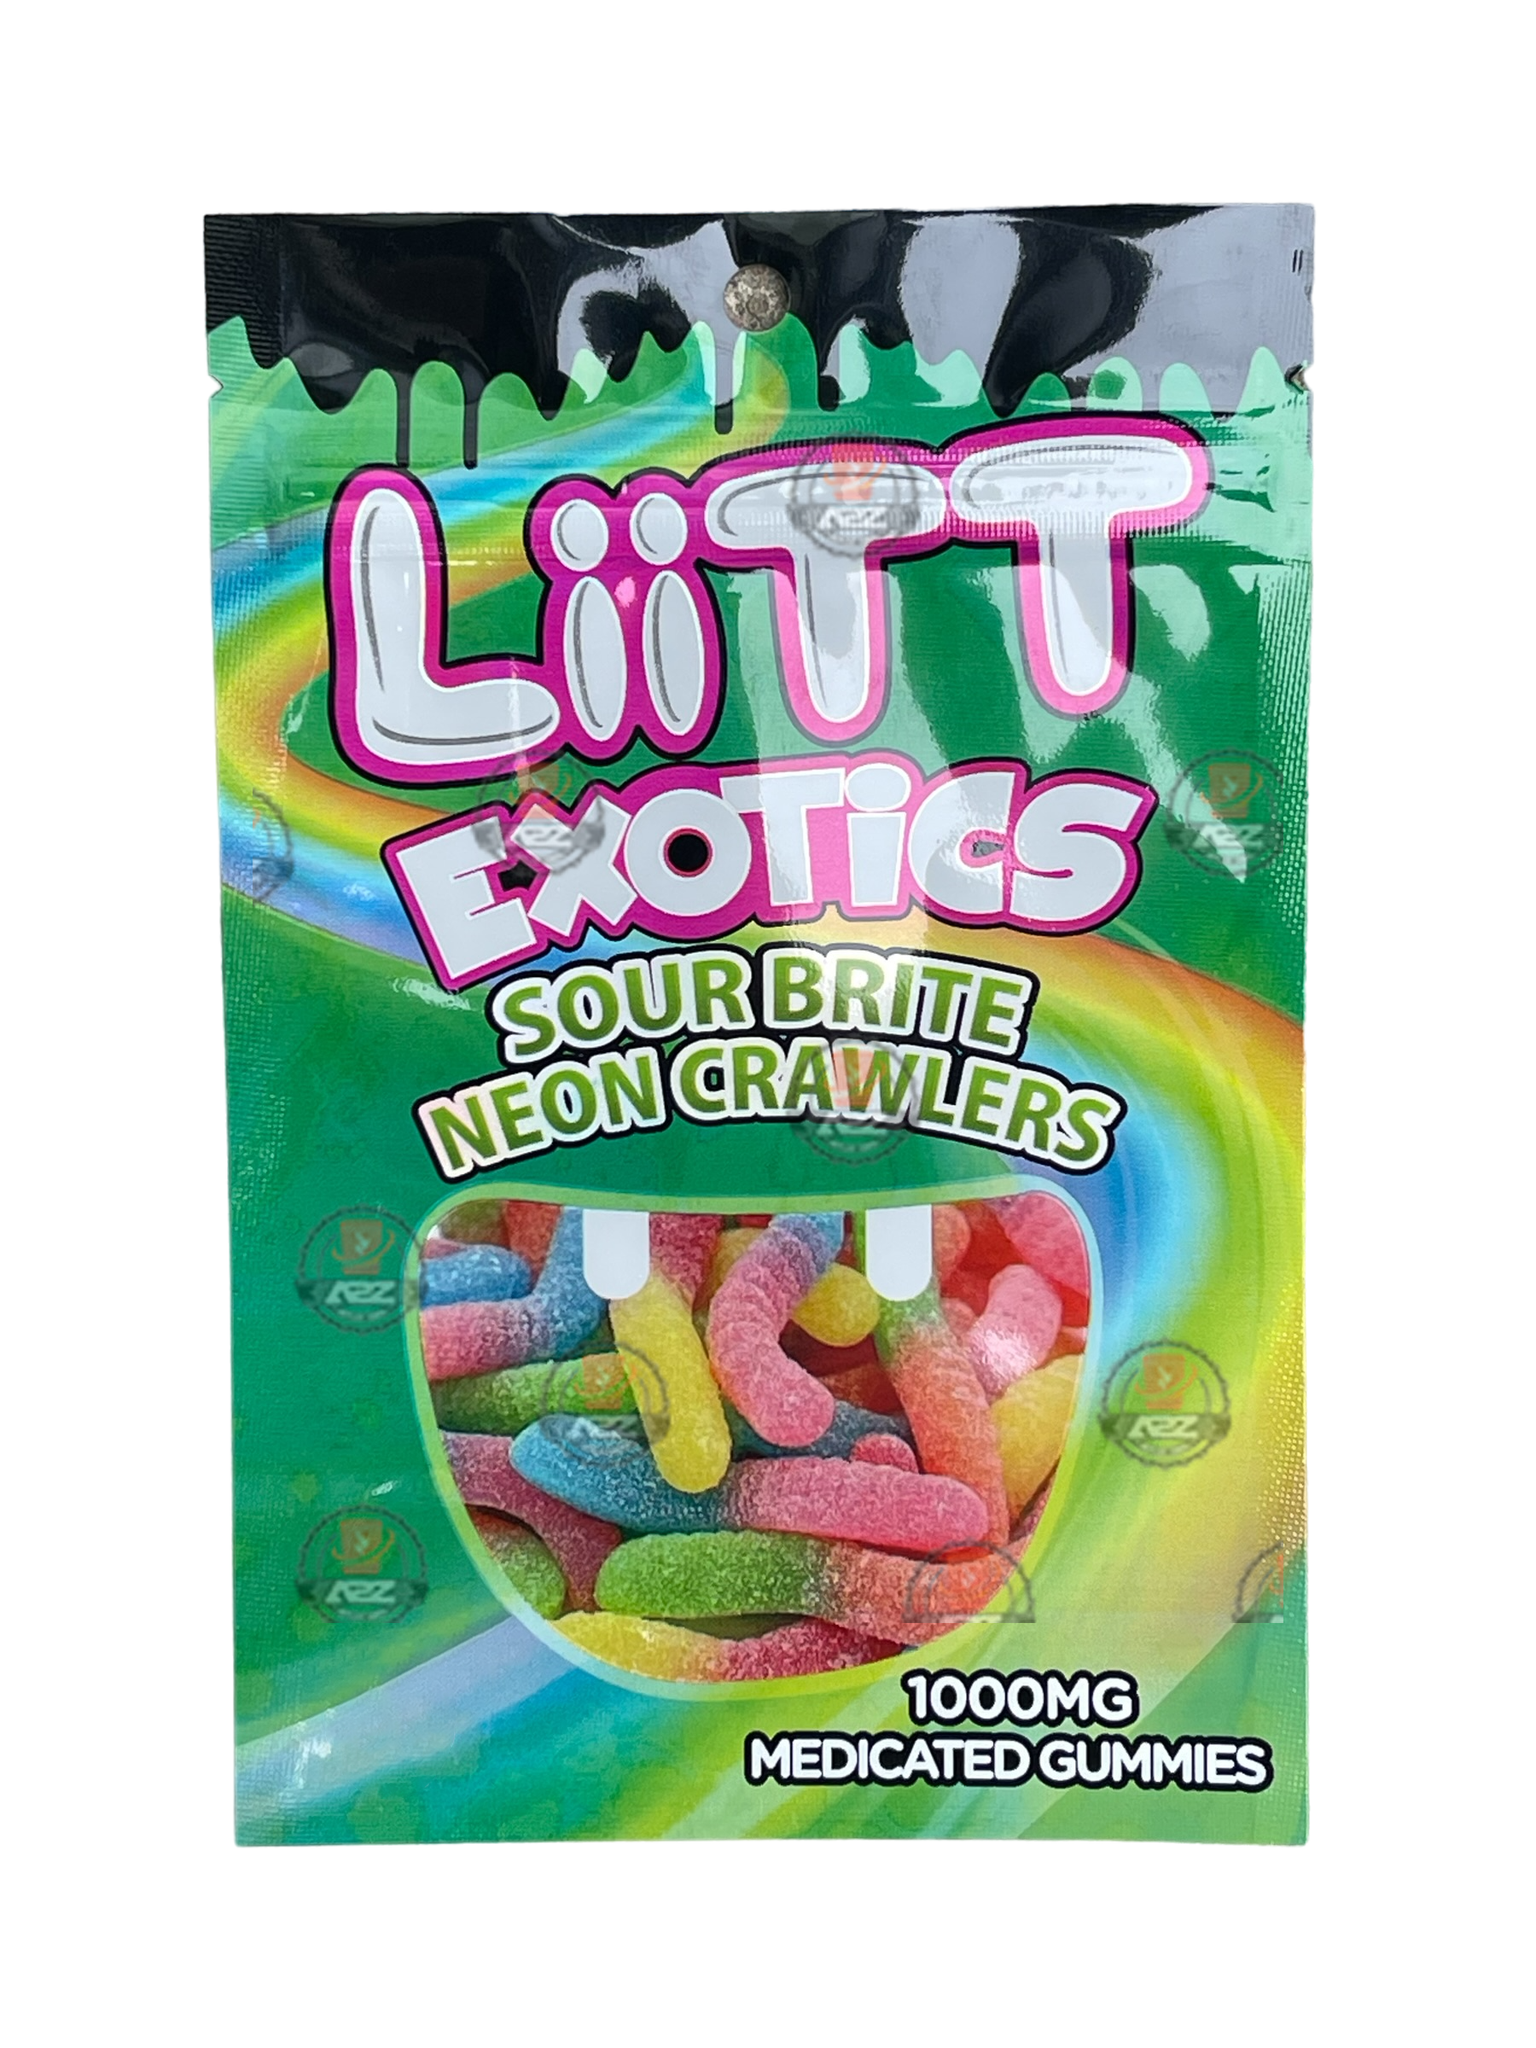 Liitt Exotics Sour Brite Neon clawers 3.5g Mylar Bag 1000MG (Packaging Only)